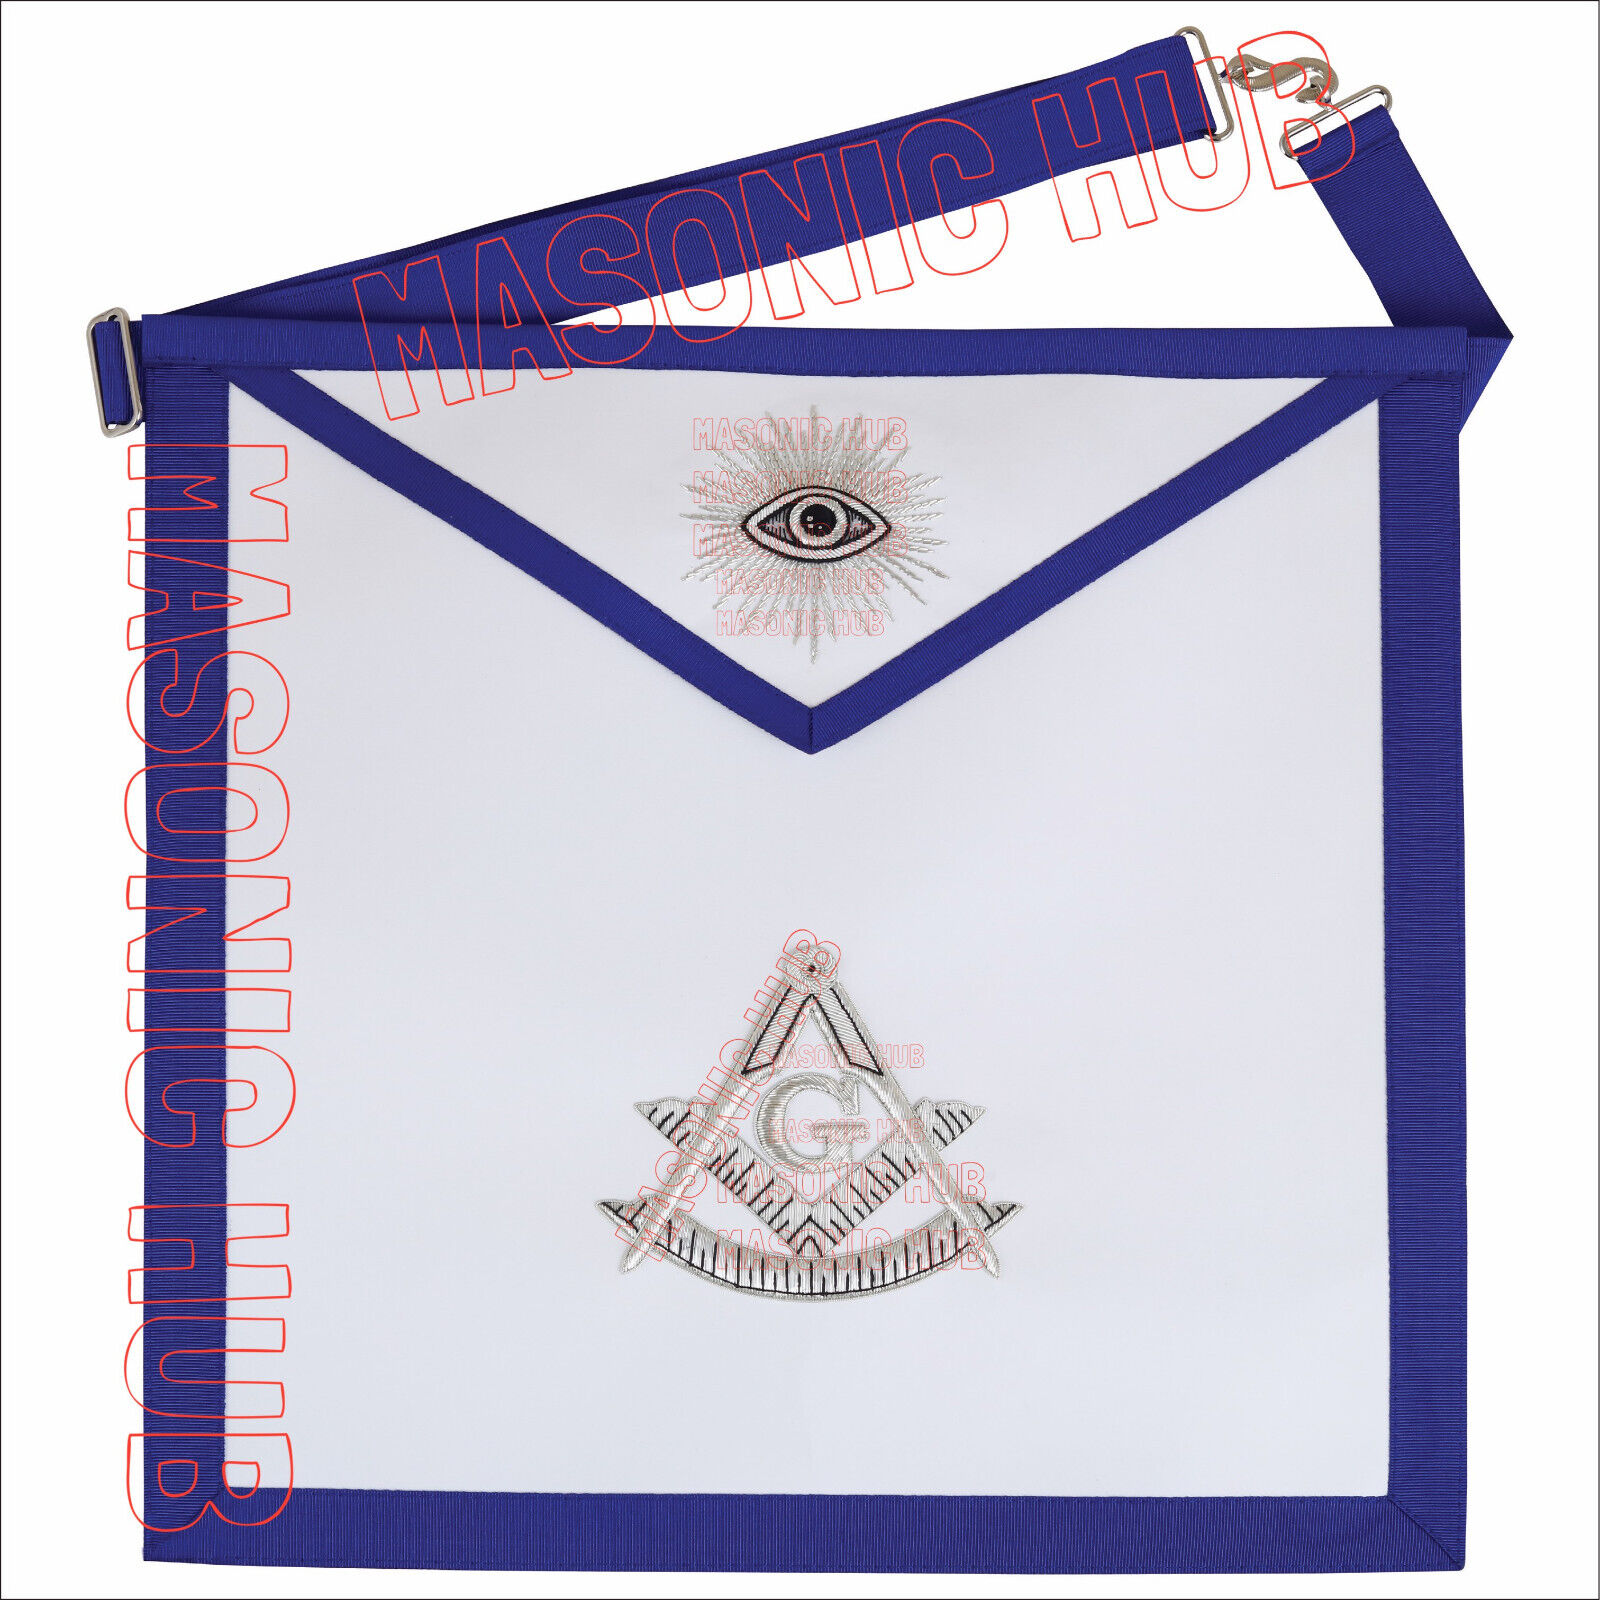 Texas Legacy: Genuine Leather Past Masters Apron with Hand-Embroidered Detailing